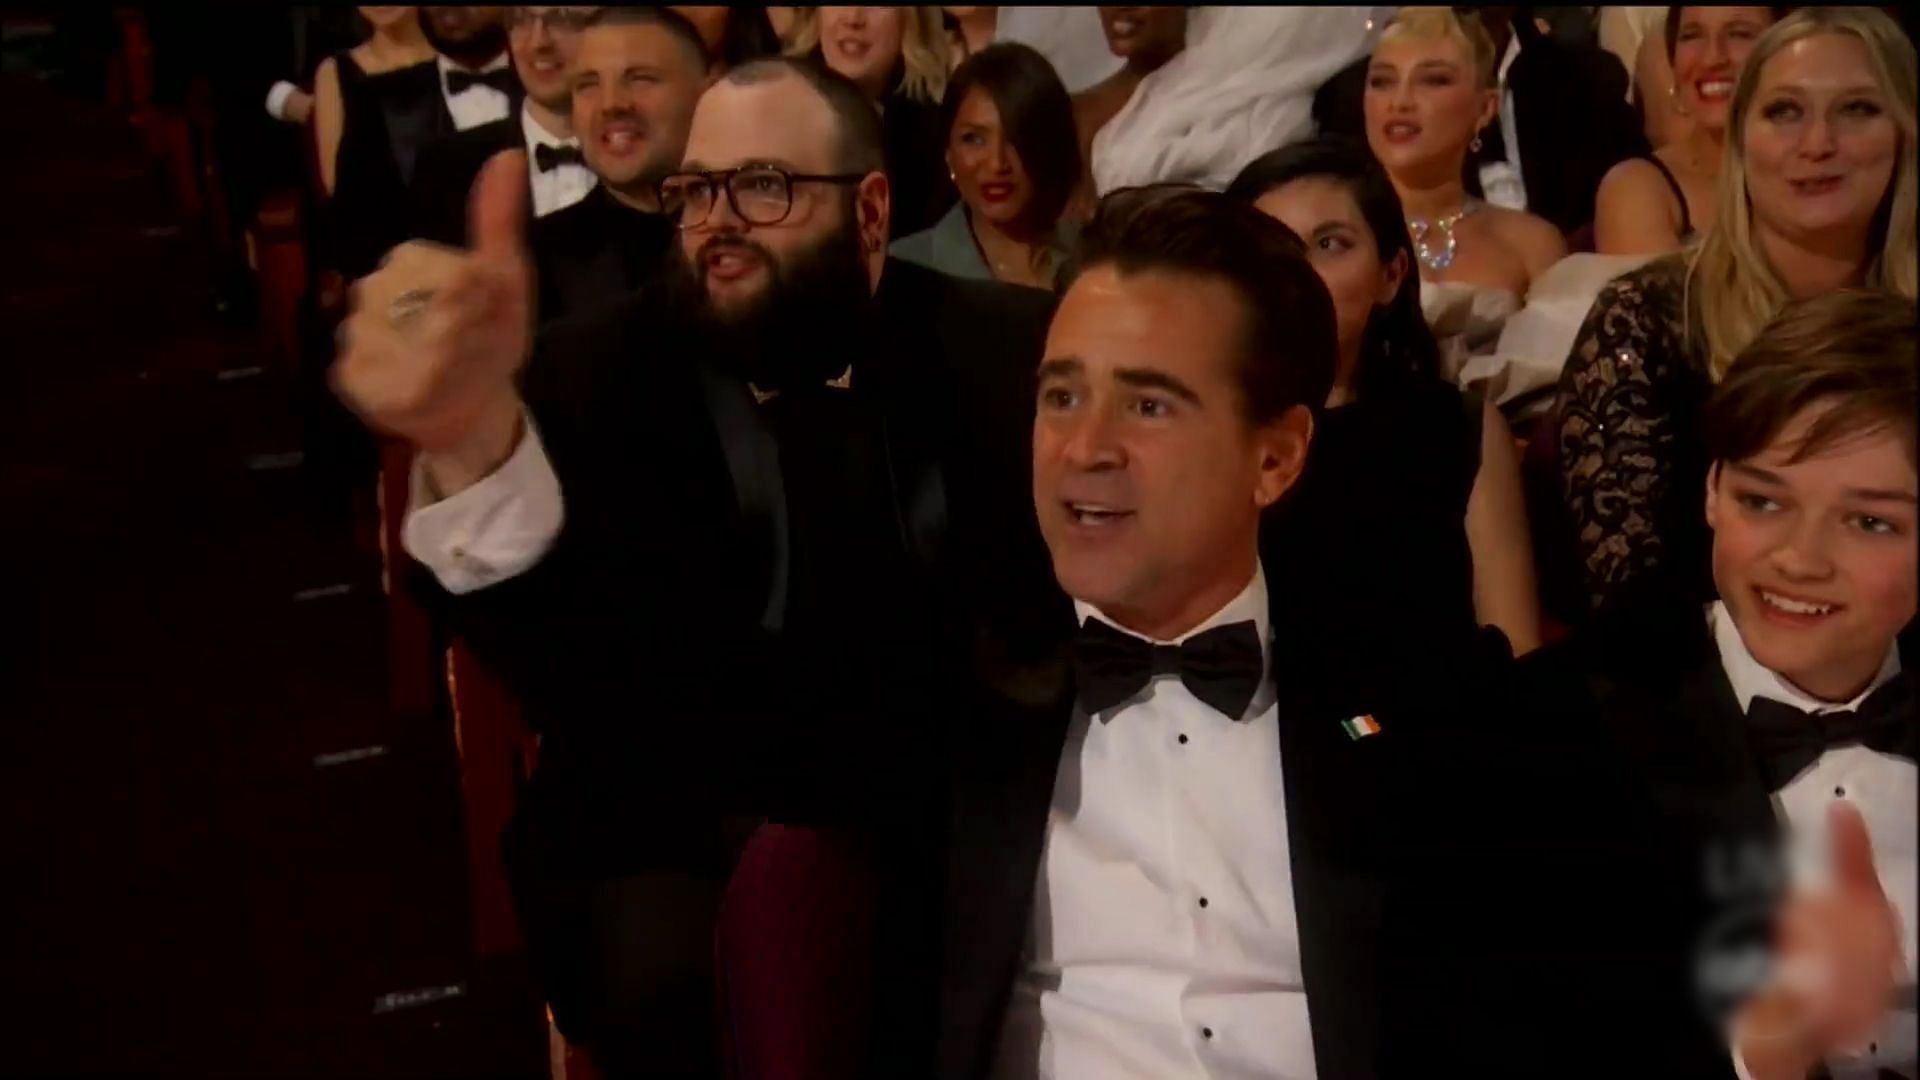 Colin Farrell sending a Thumbs-up to James Martin (image via Twitter/@nowthisnews)